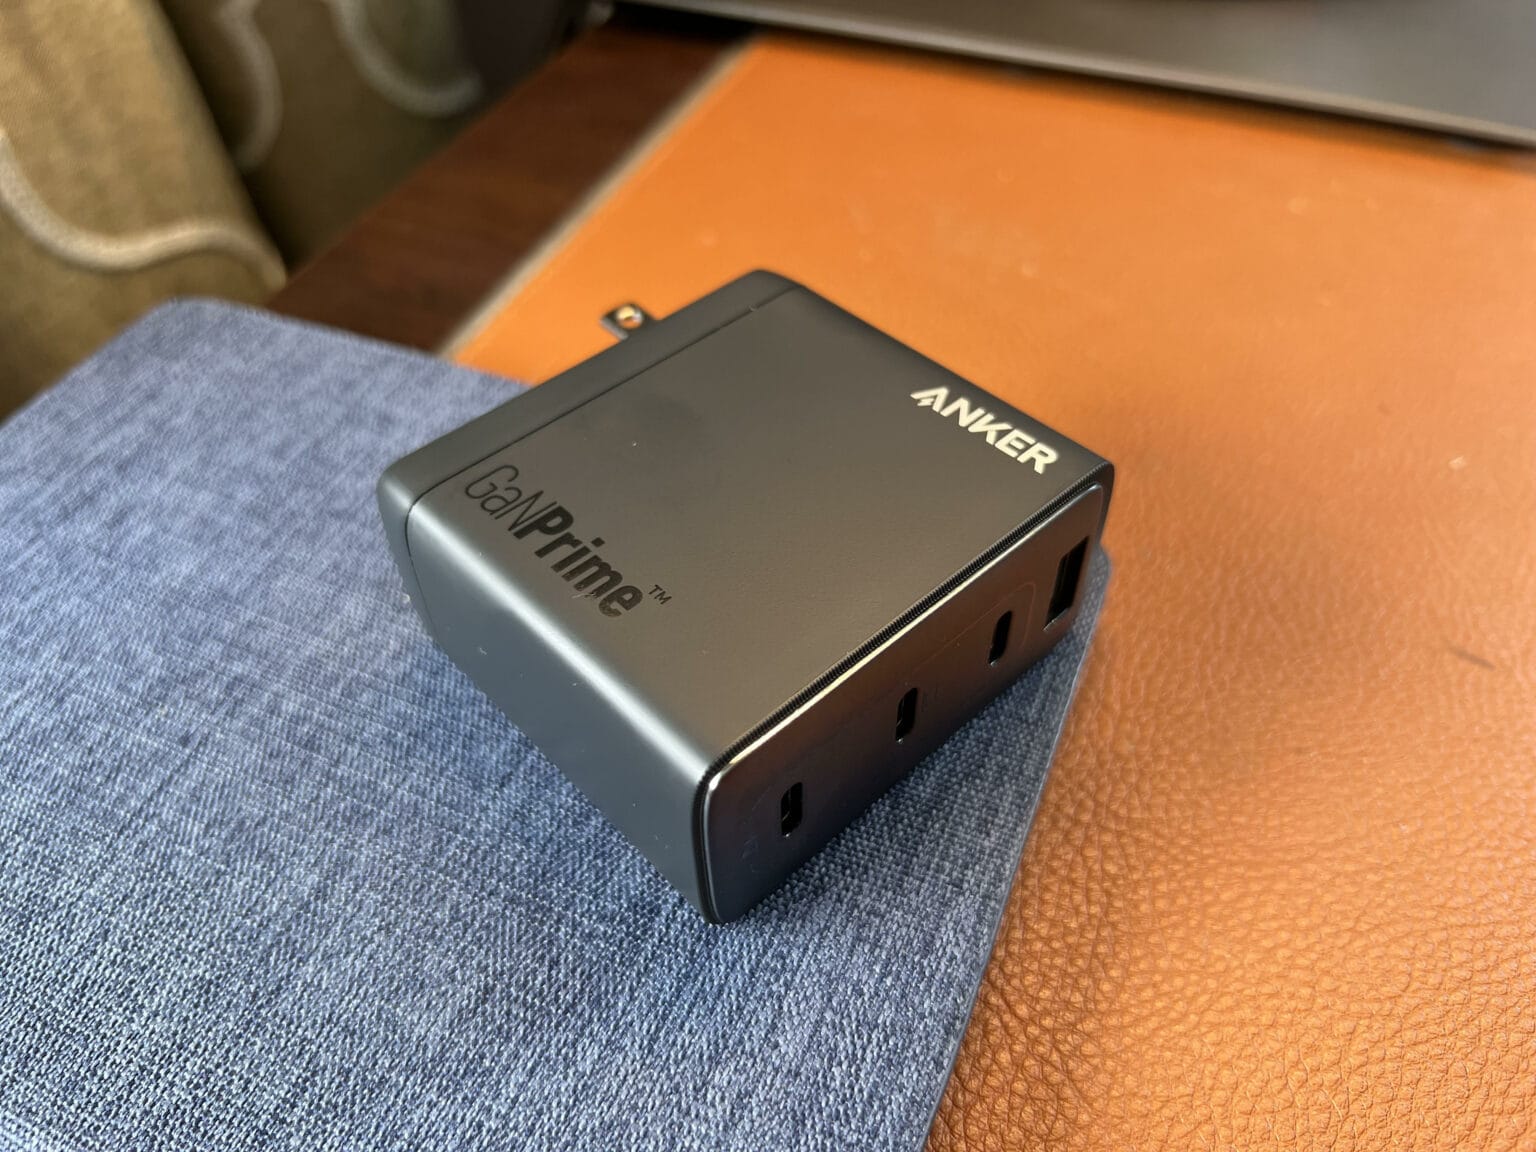 Compact Anker 747 GanPrime Charger packs 150W of power [Review